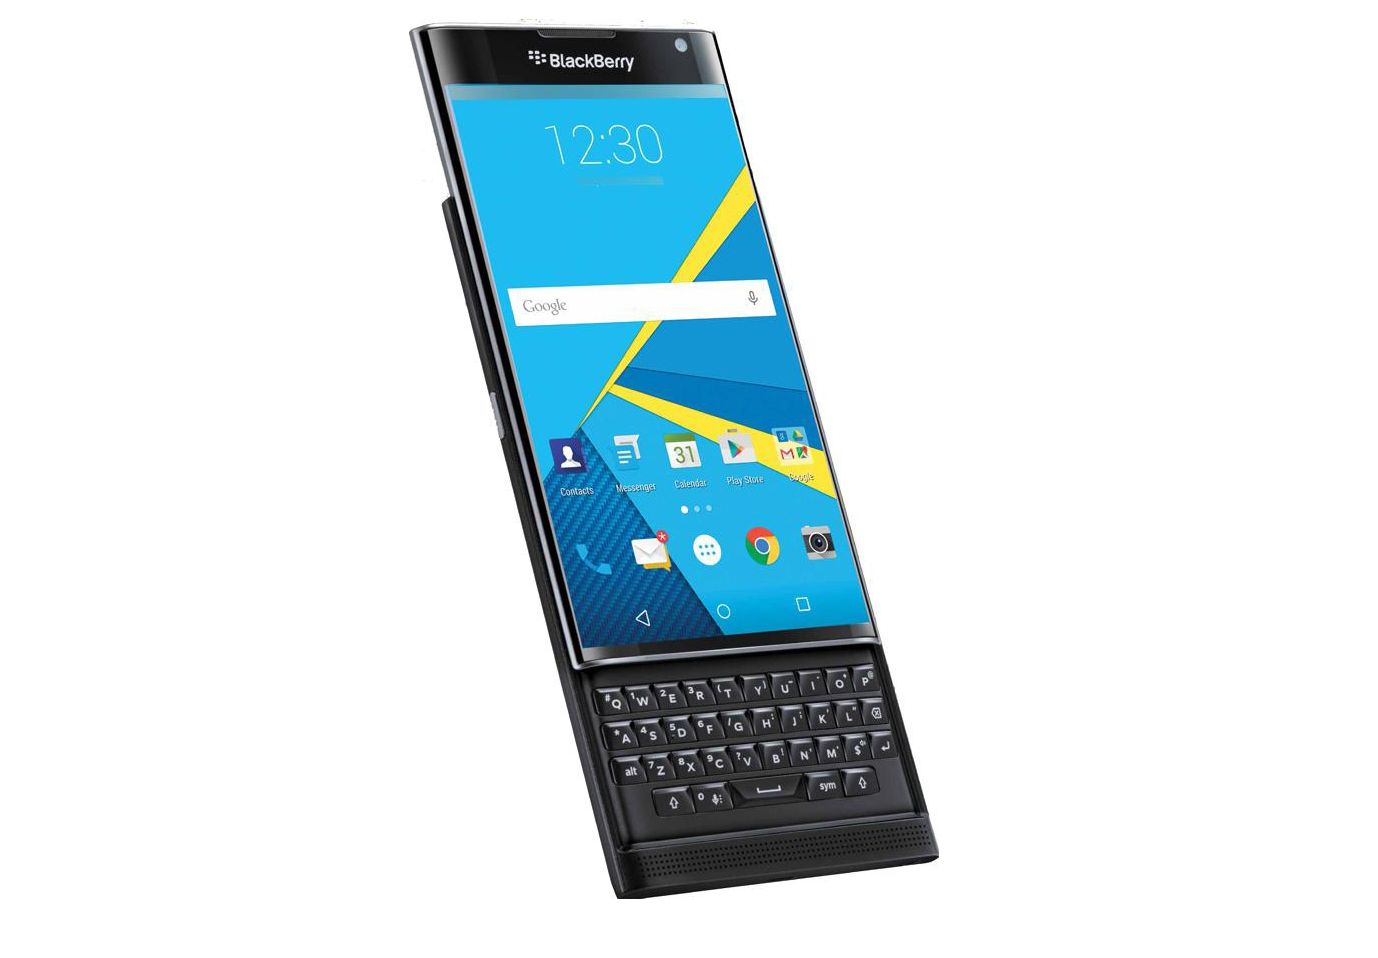 blackberry ceo john chen officially confirms priv android handset image 2